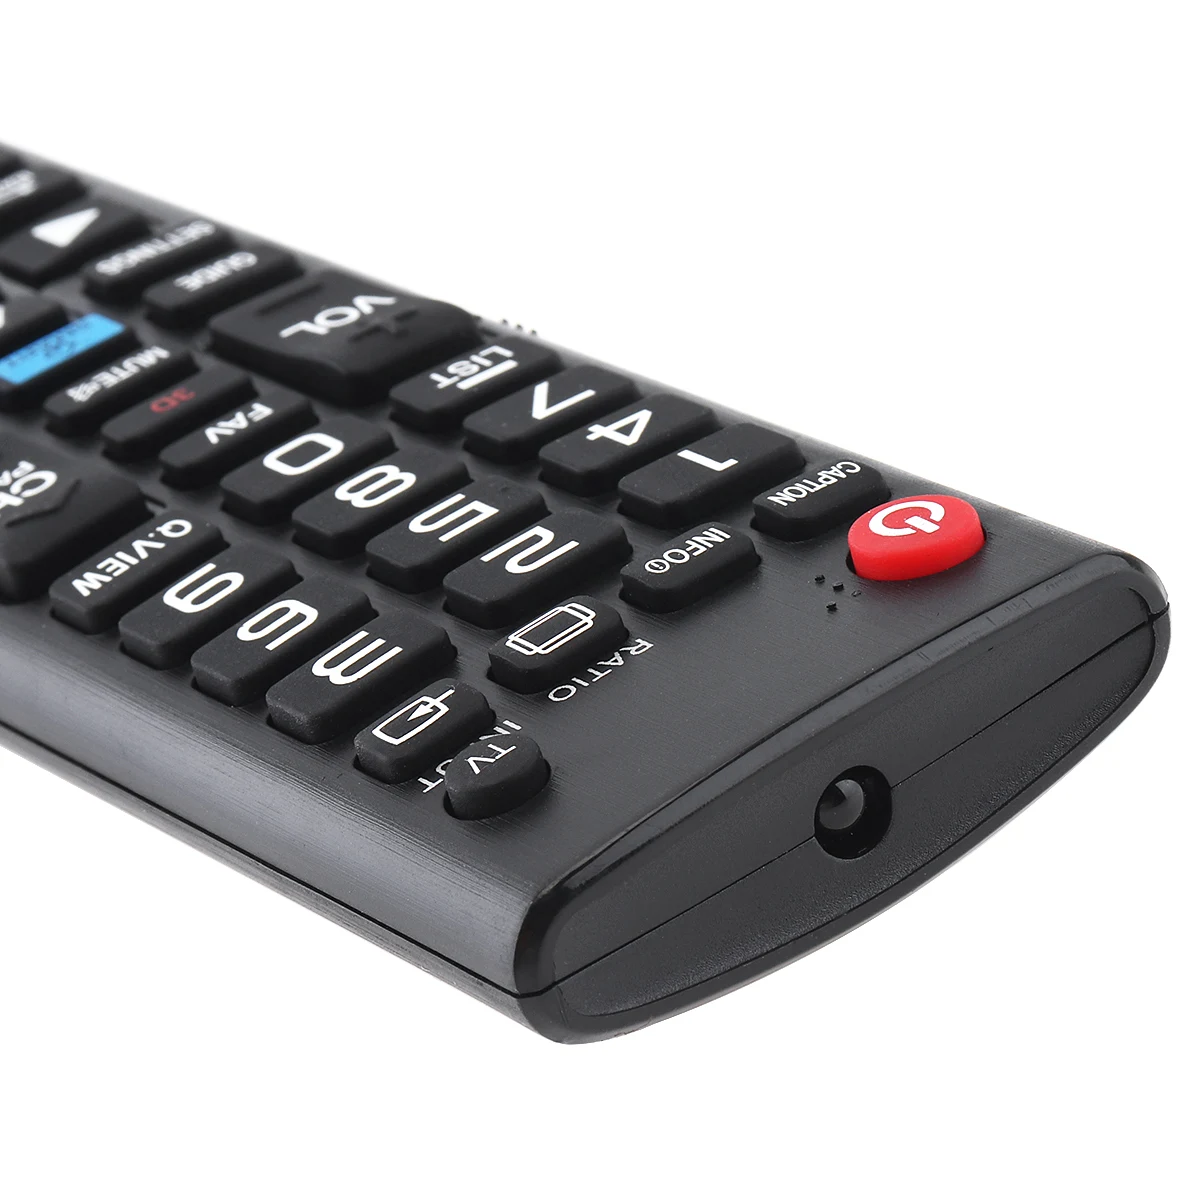 

IR 433MHz Replacement TV Remote Control with Long Remote Control Distance for AKB73975702/AKB73975701/AKB75055701/AKB74475401